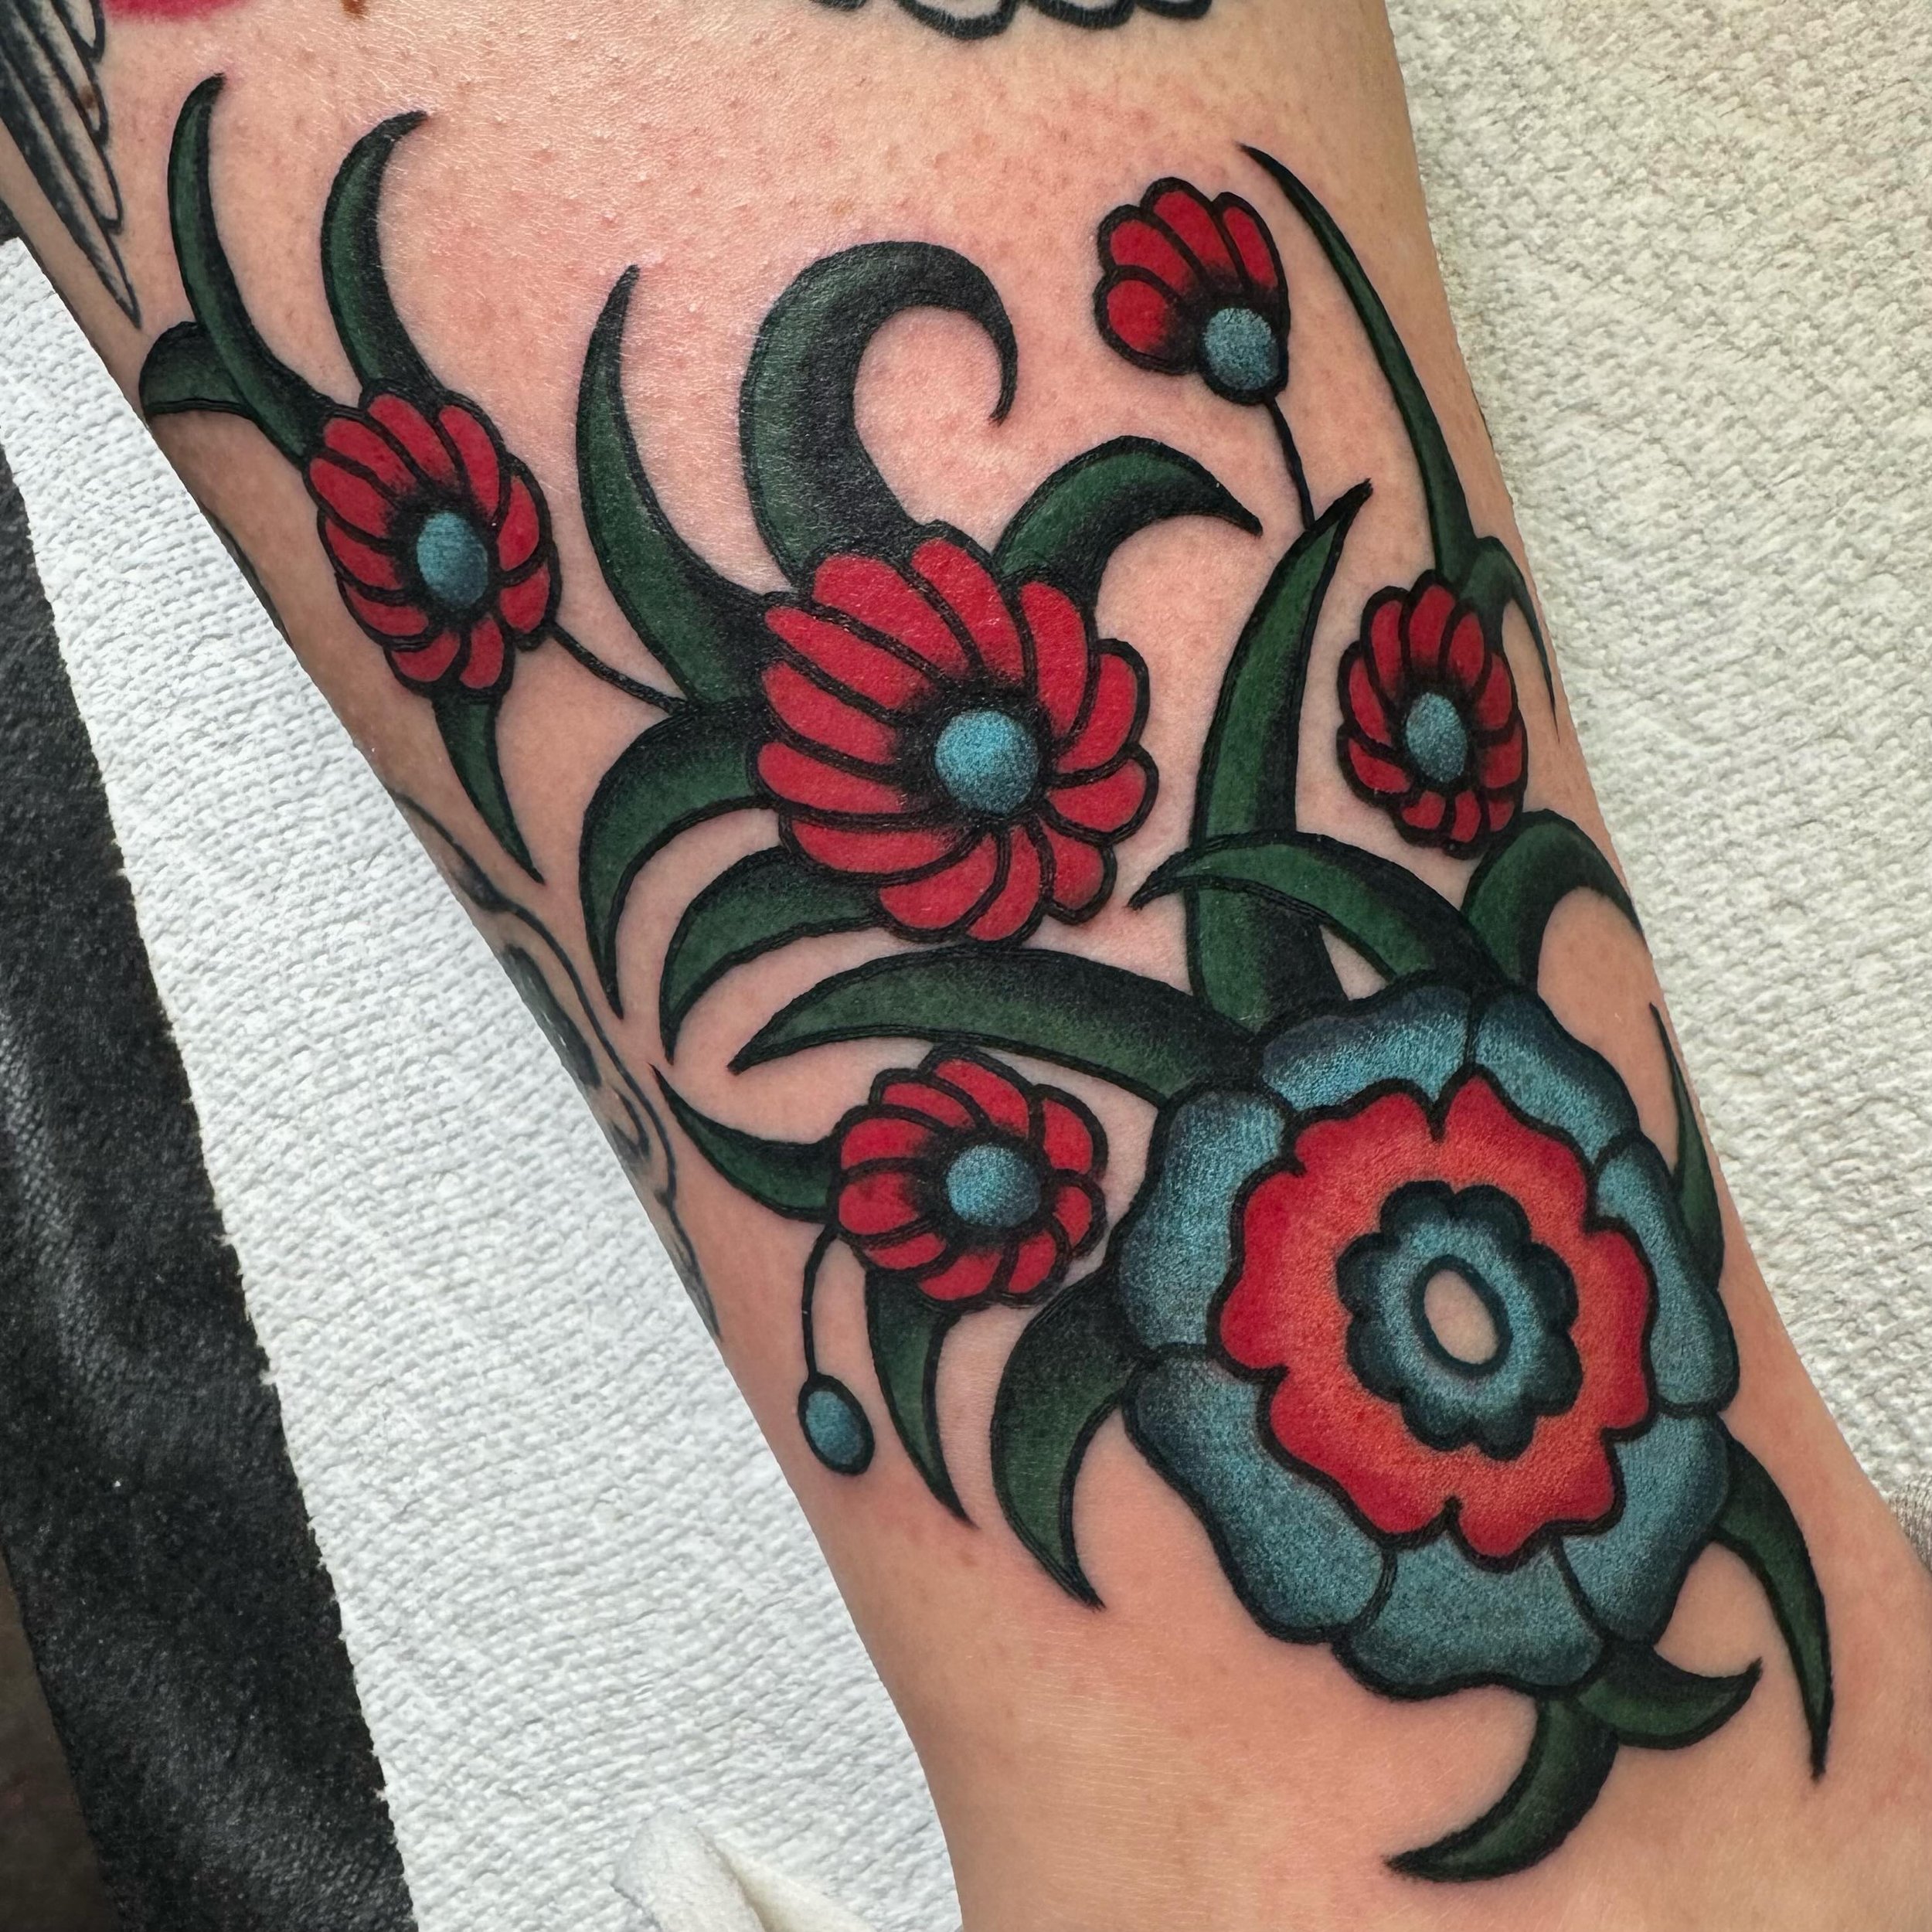 Some flowers made @keepsakeokc 

Thanks again Kathryn!

Book yours now, Tuesday-Friday, at 11am and 3pm, walk-ins on Saturdays!

#tattooflash #classictattoo #vintagetattoo #traditionaltattooflash #tattoo #tattoos #oklahoma #oklahomacity #okc #oldscho